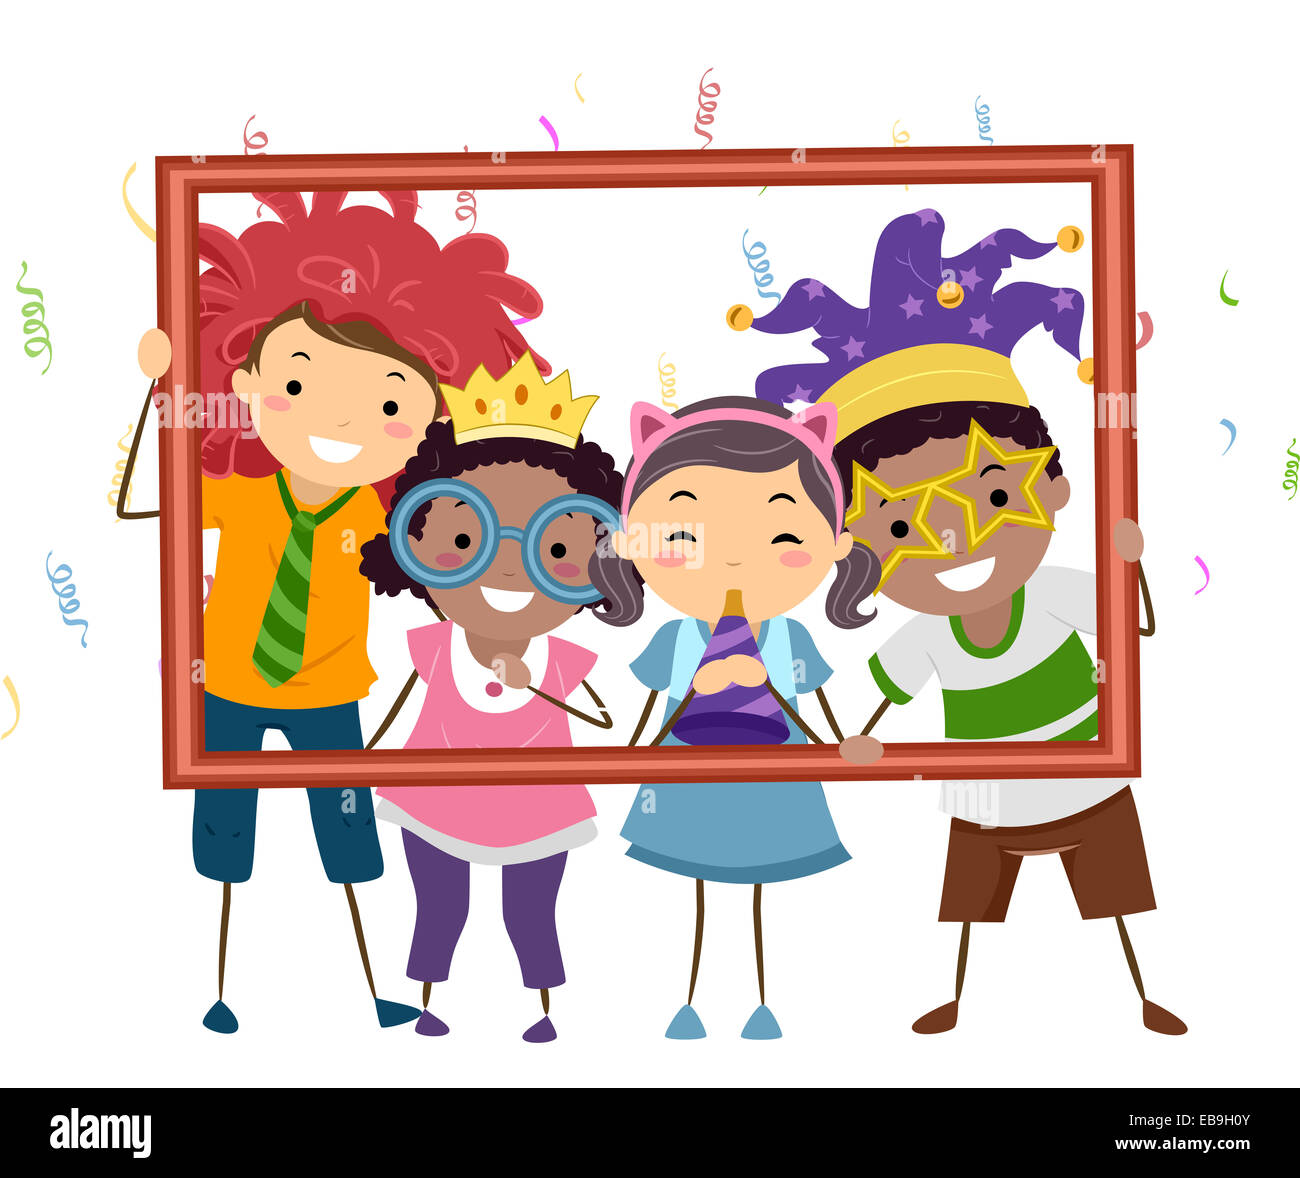 Illustration Featuring a Group of Kids Wearing Party Costumes Holding a Hollow Frame Stock Photo